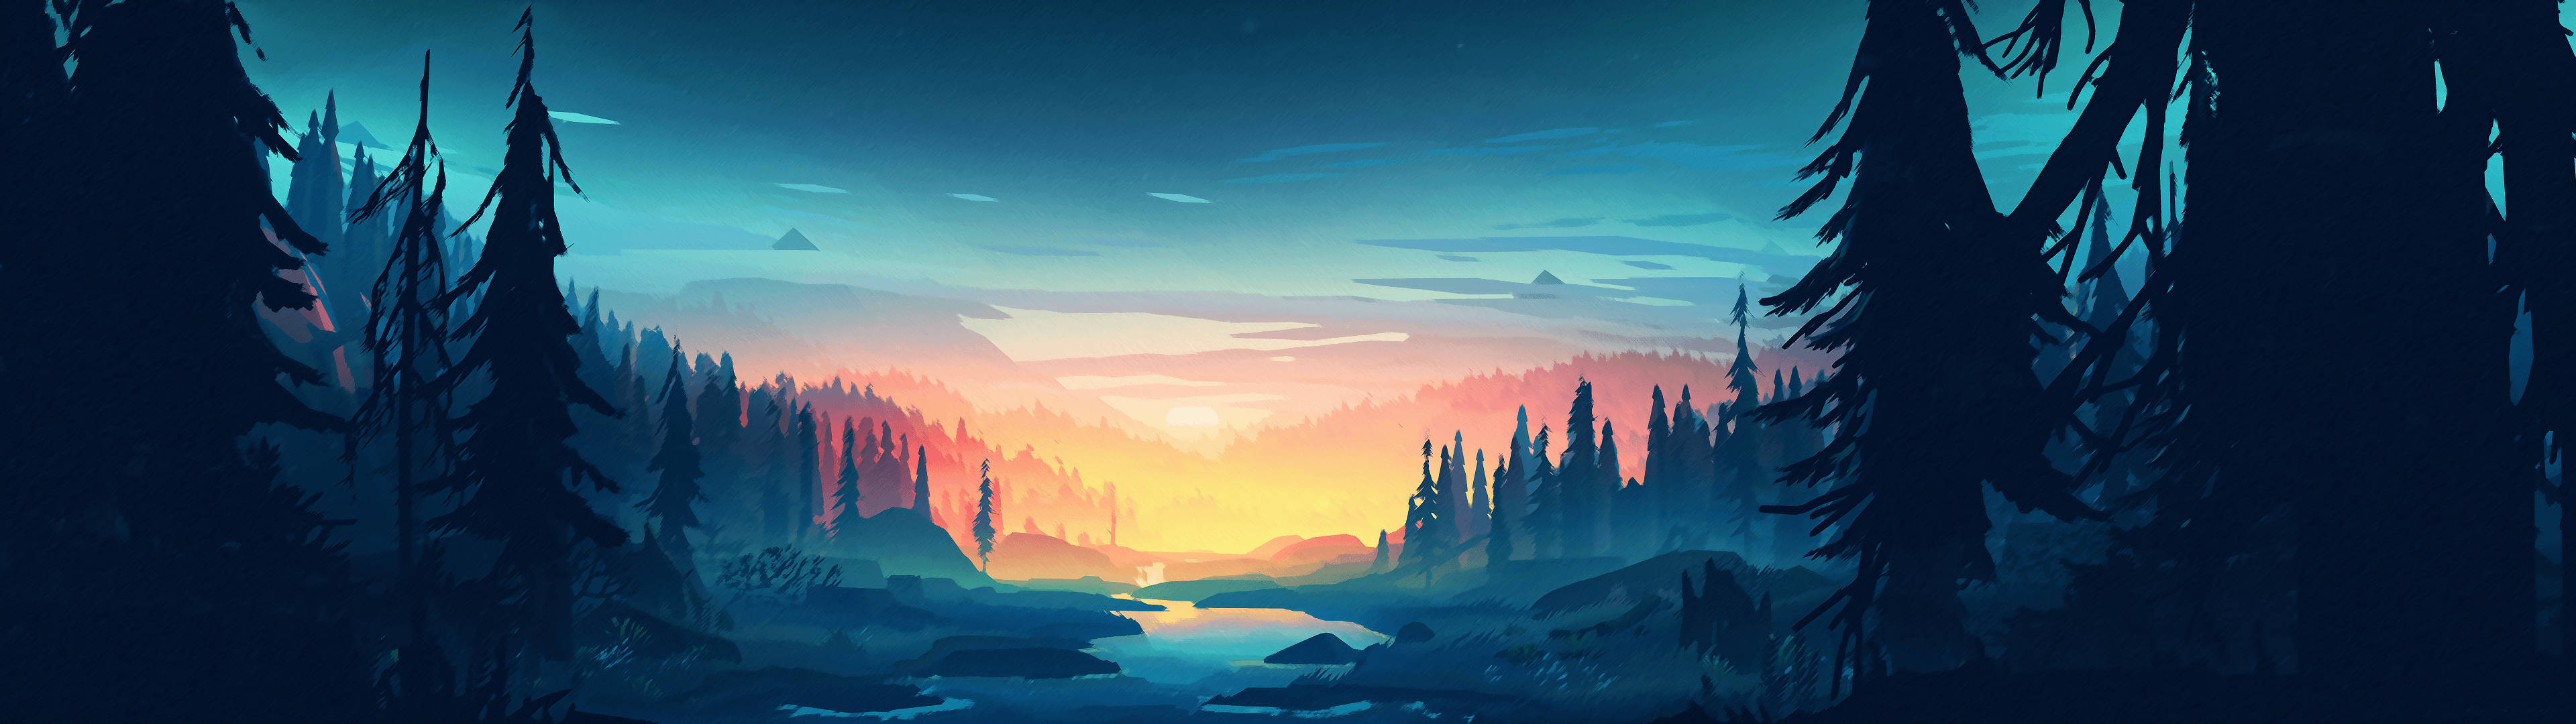 3840x1080 4k Sunrise In Forest